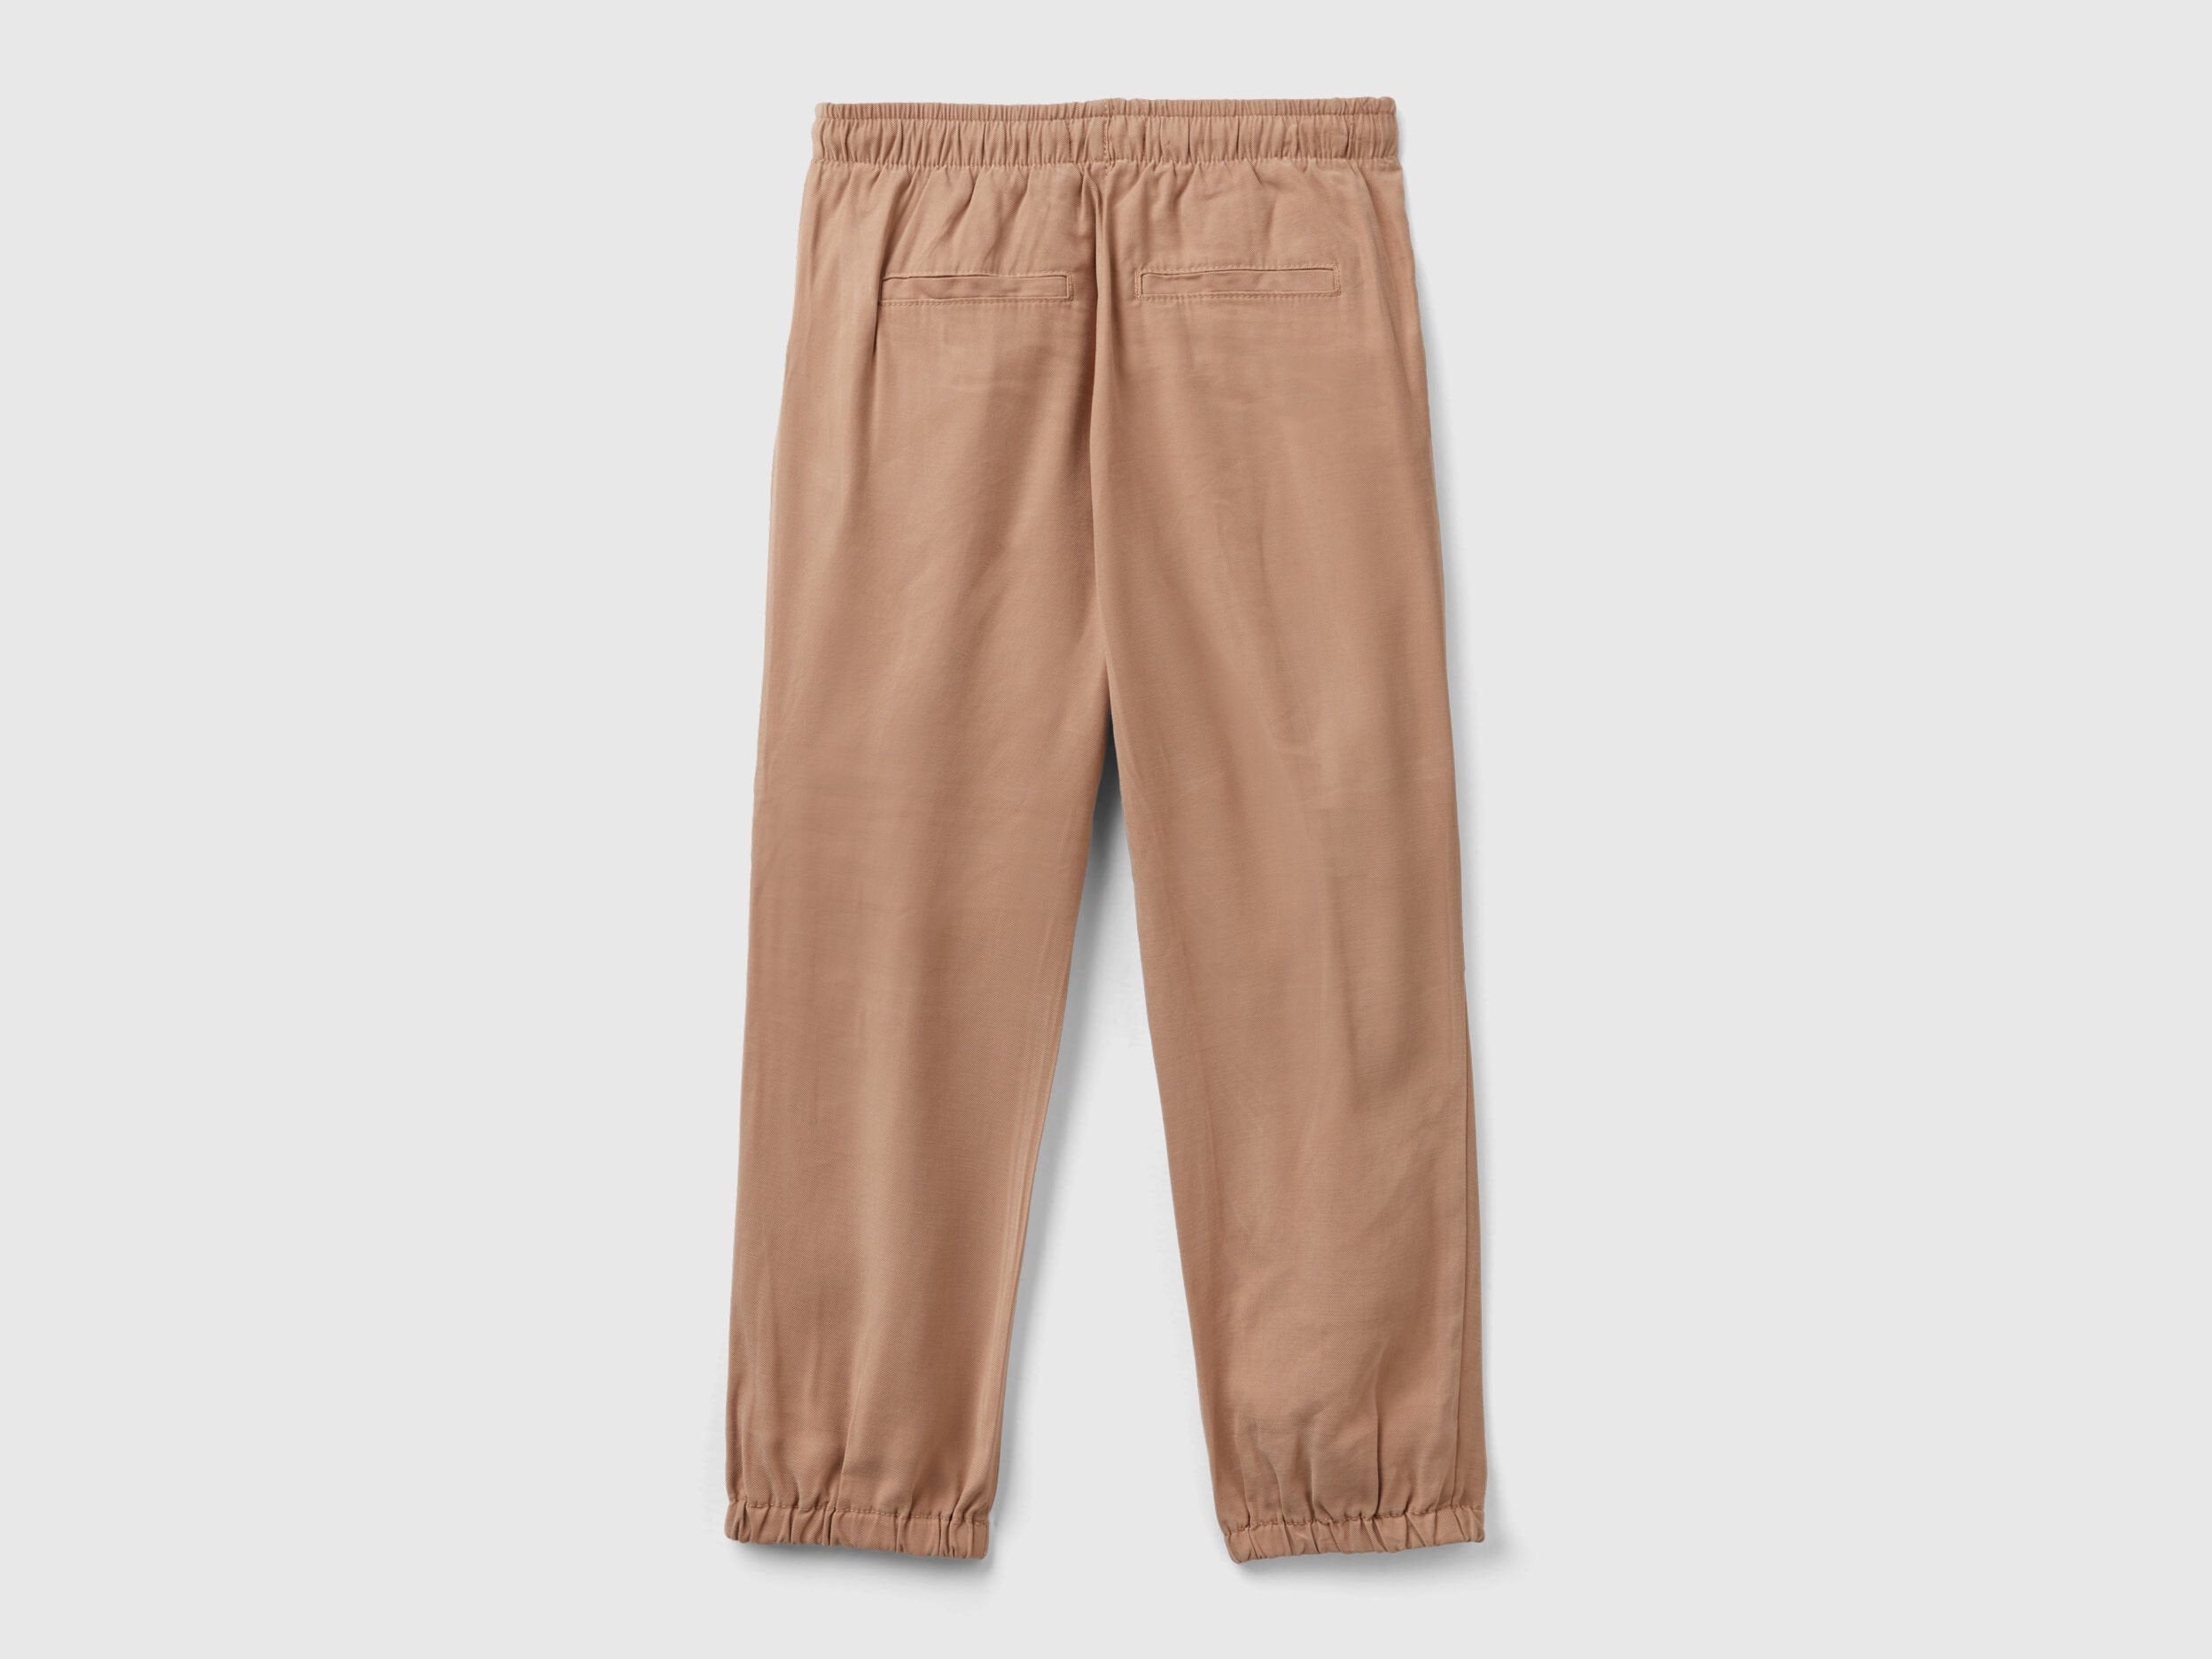 Parachute Trousers With Drawstring_45ZZCF030_193_02